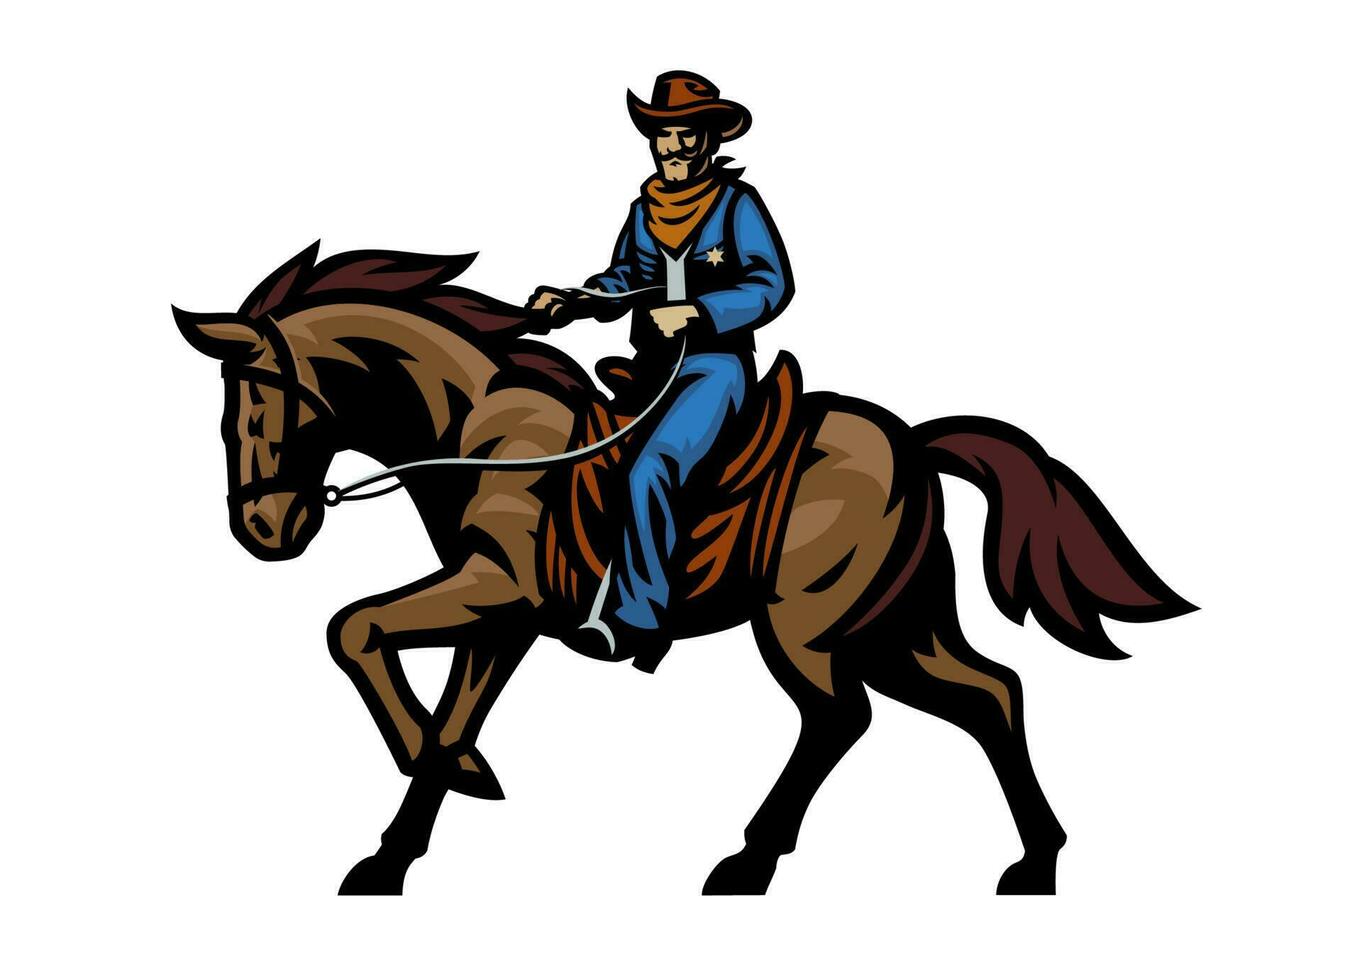 Cowboy Sheriff Riding the Horse vector